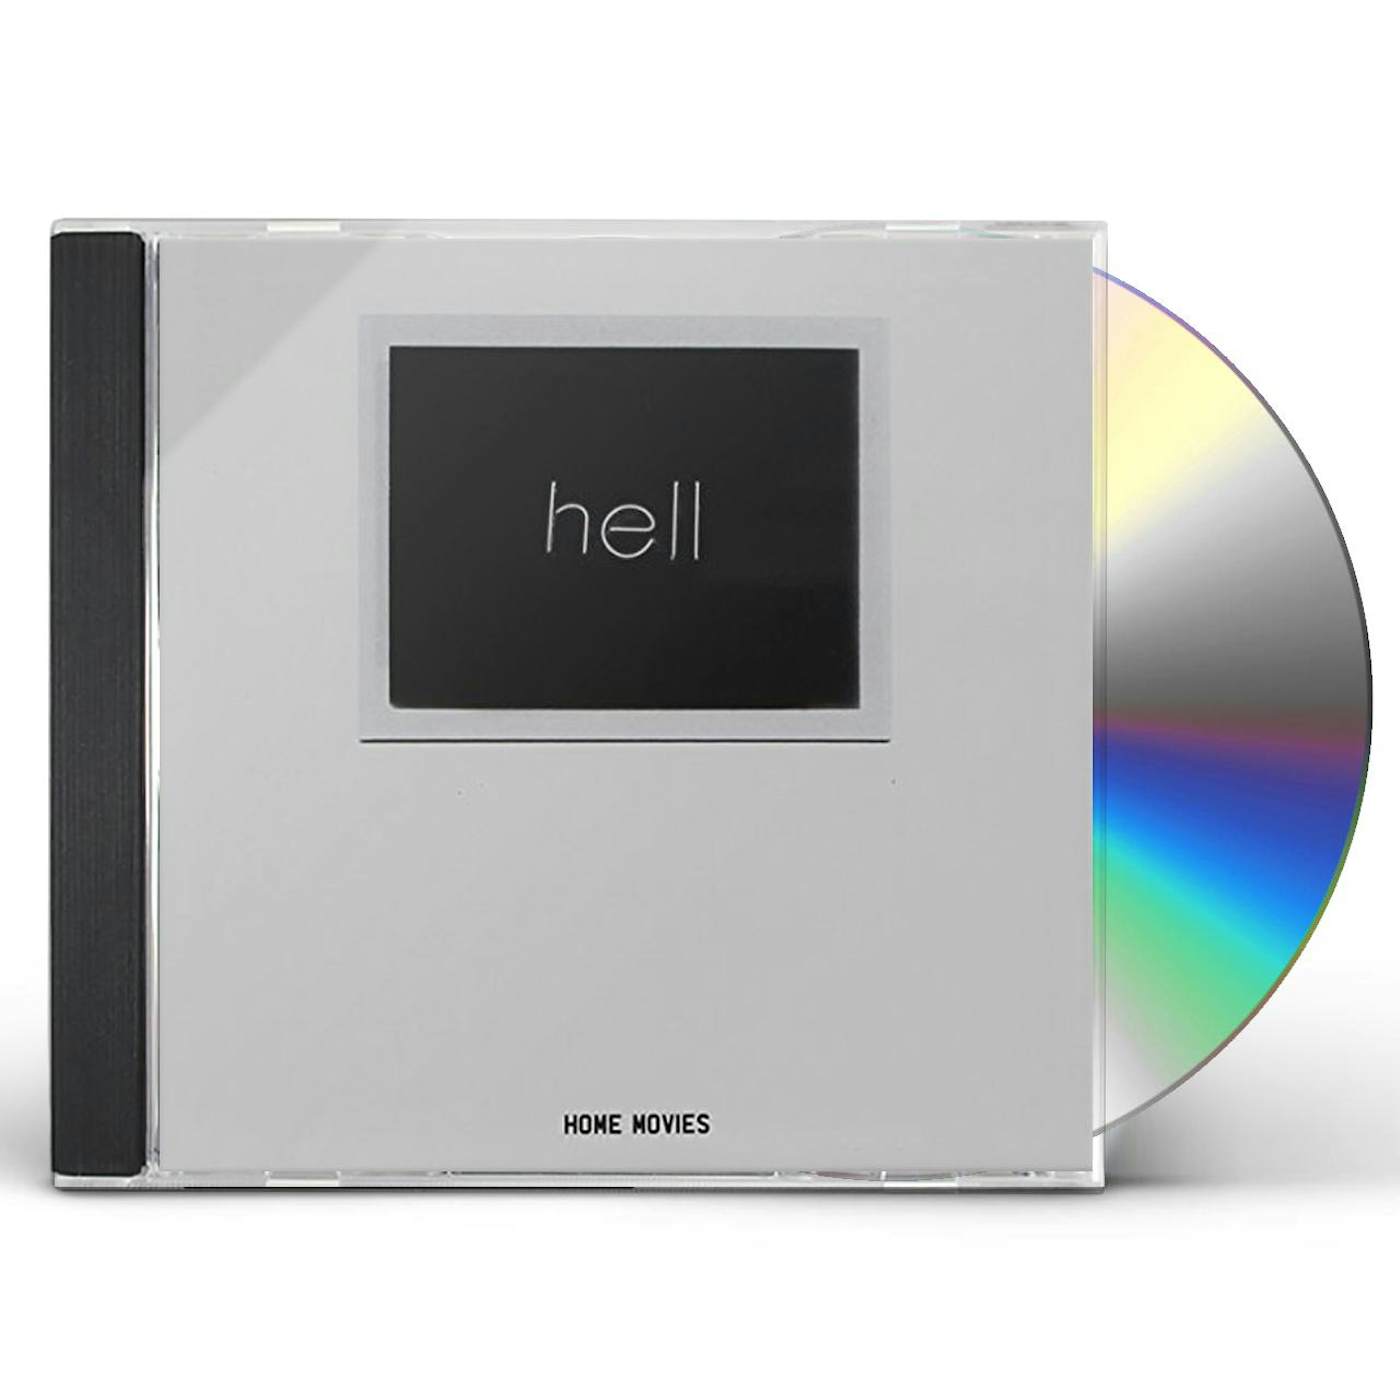 Home Movies HELL CD